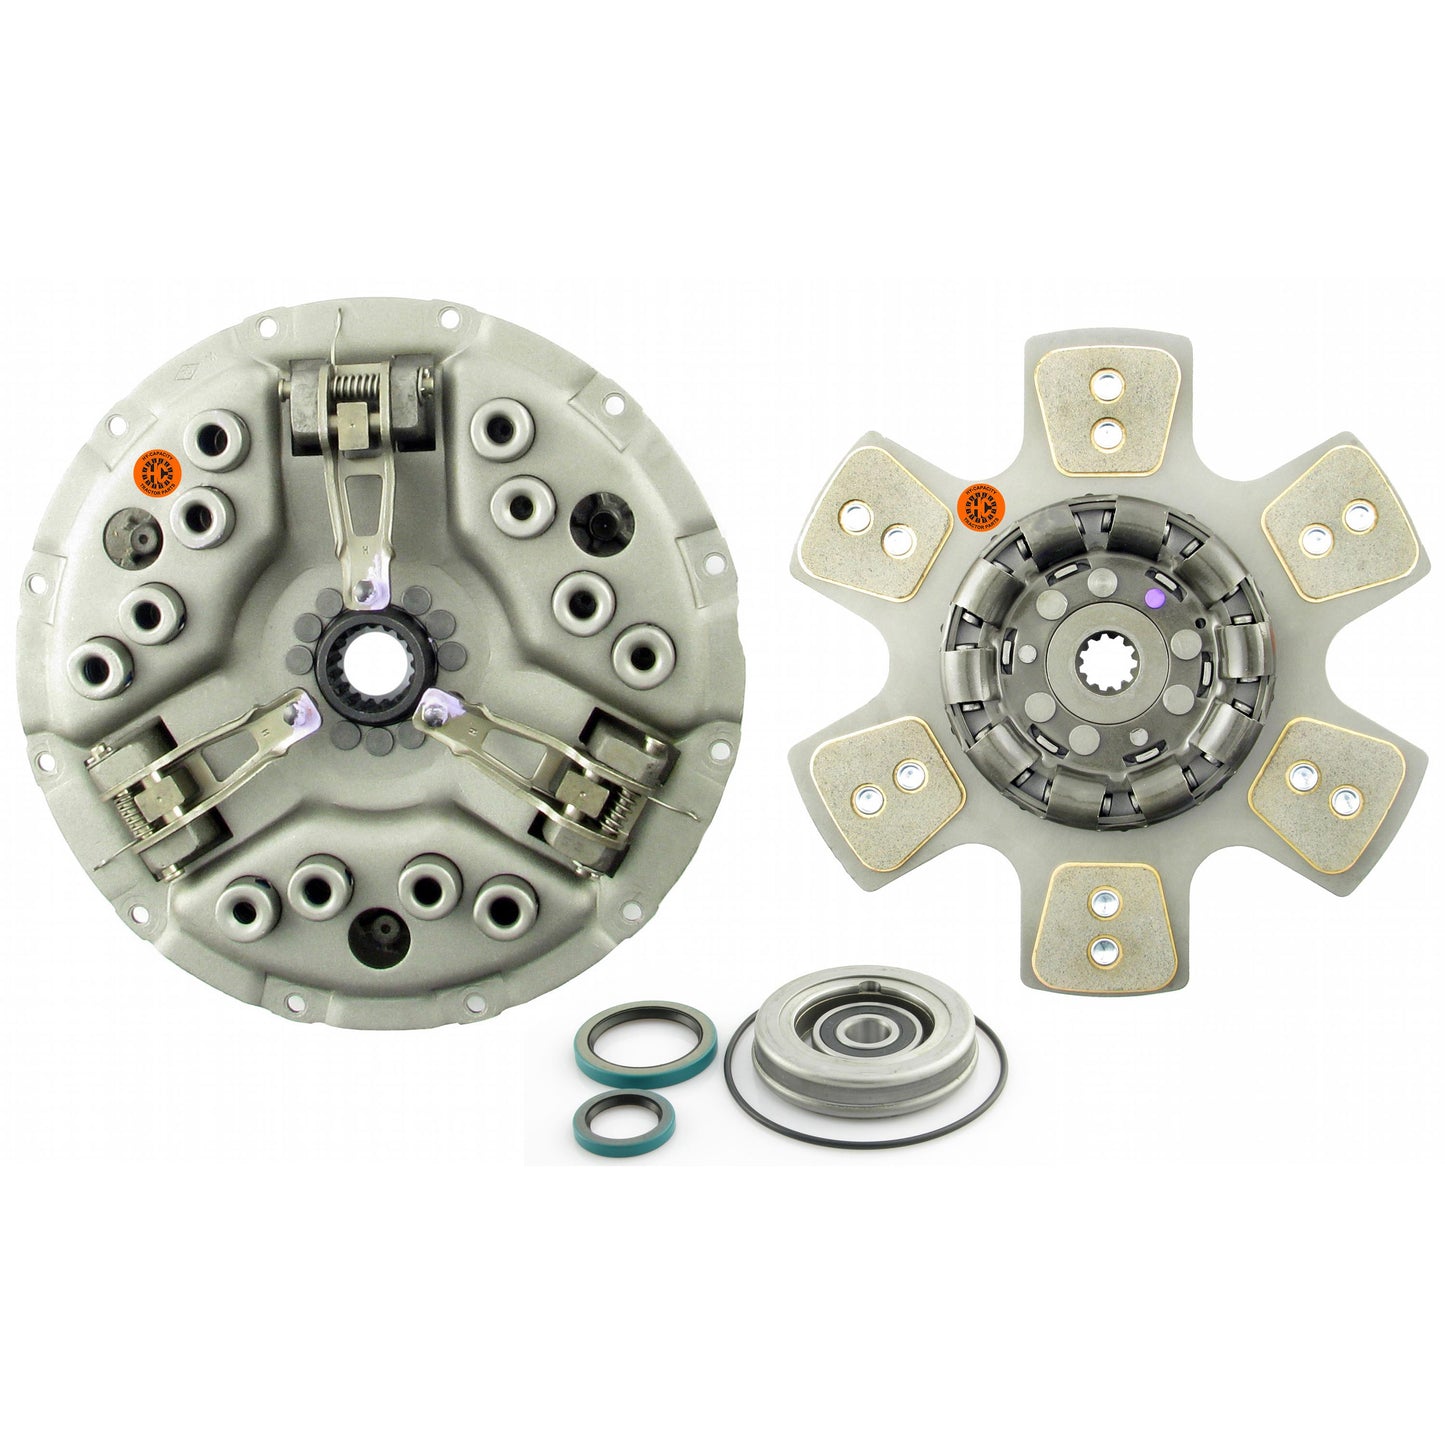 390254 KIT 14" Single Stage Clutch Kit, w/ Bearings & Seals, Light Spring Pressure - New